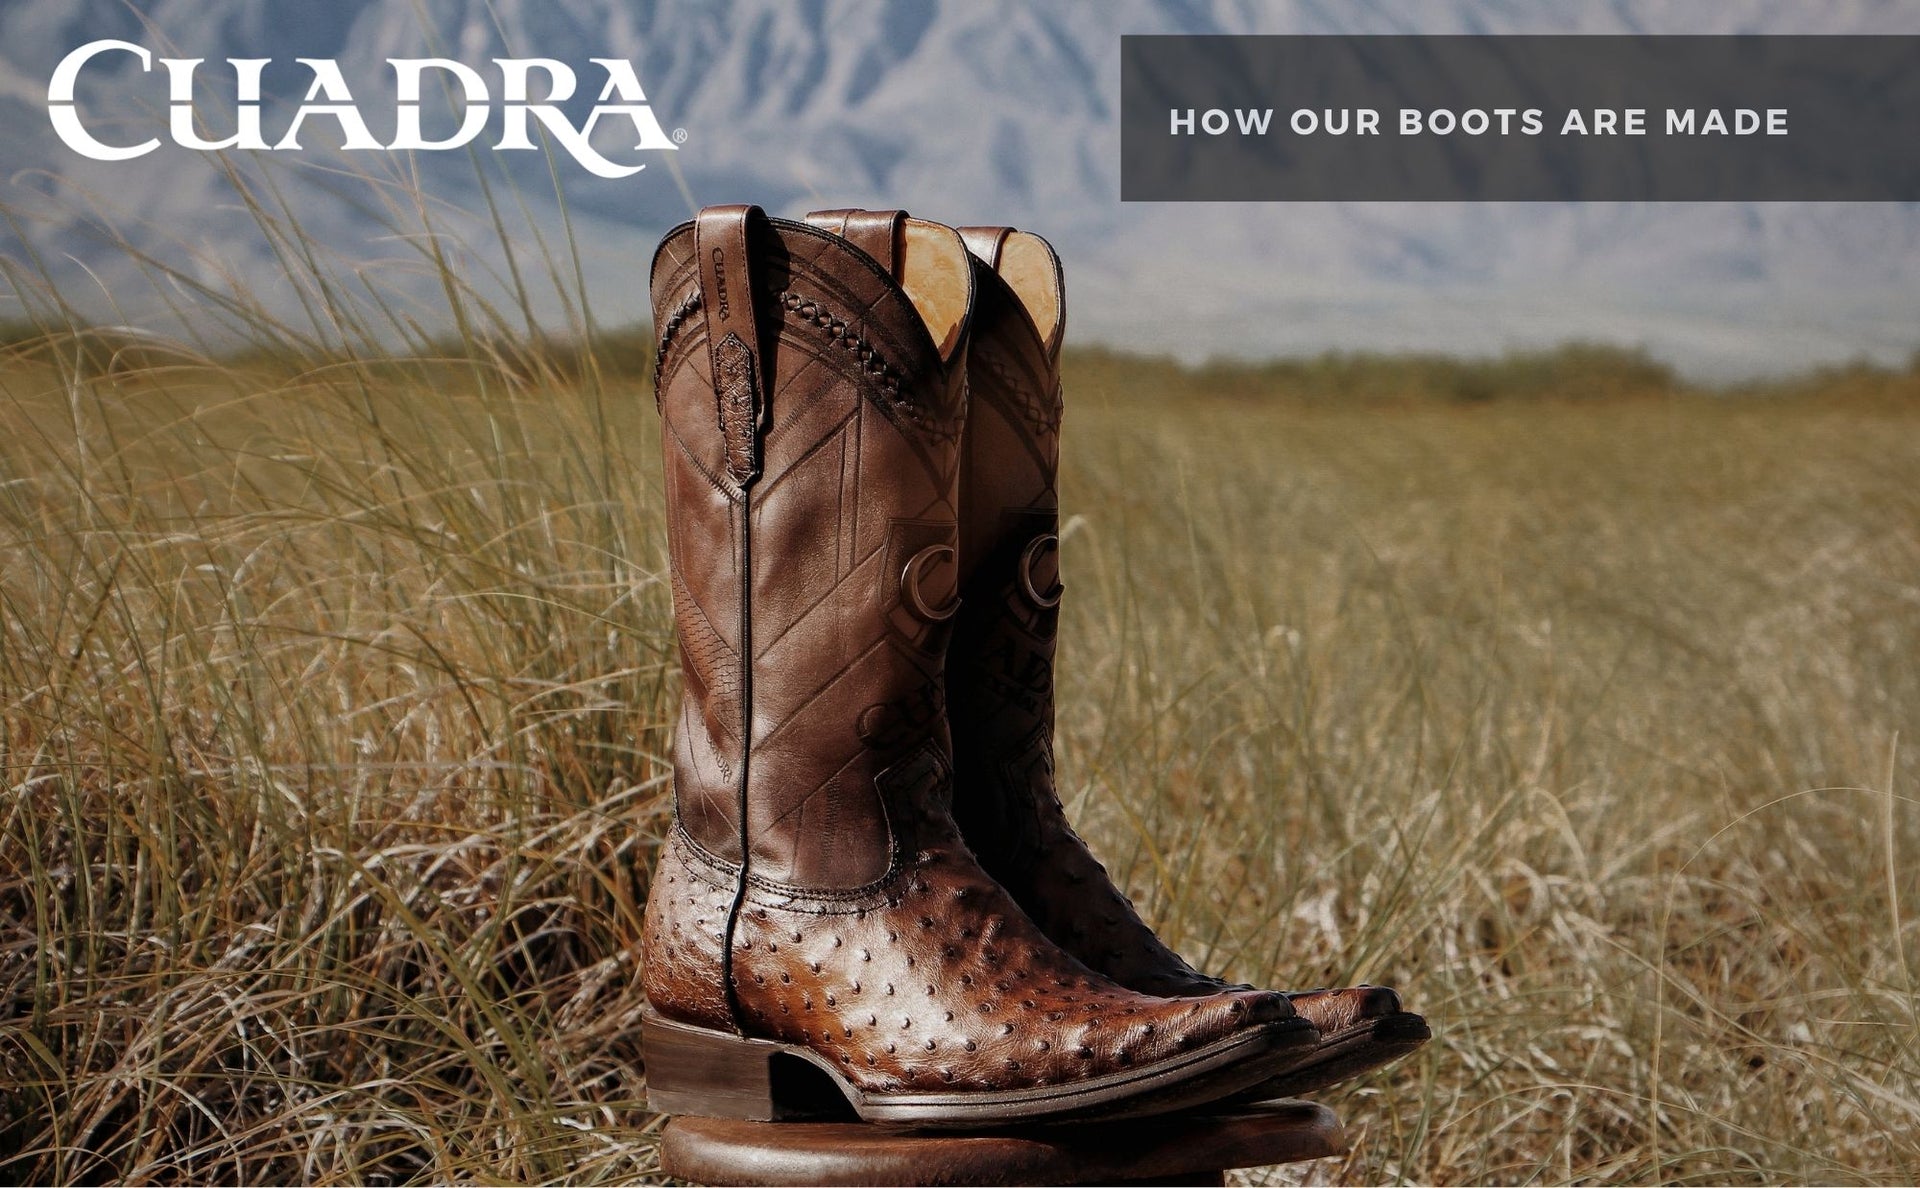 Load video: cuadra boots manufacture process how boots are made